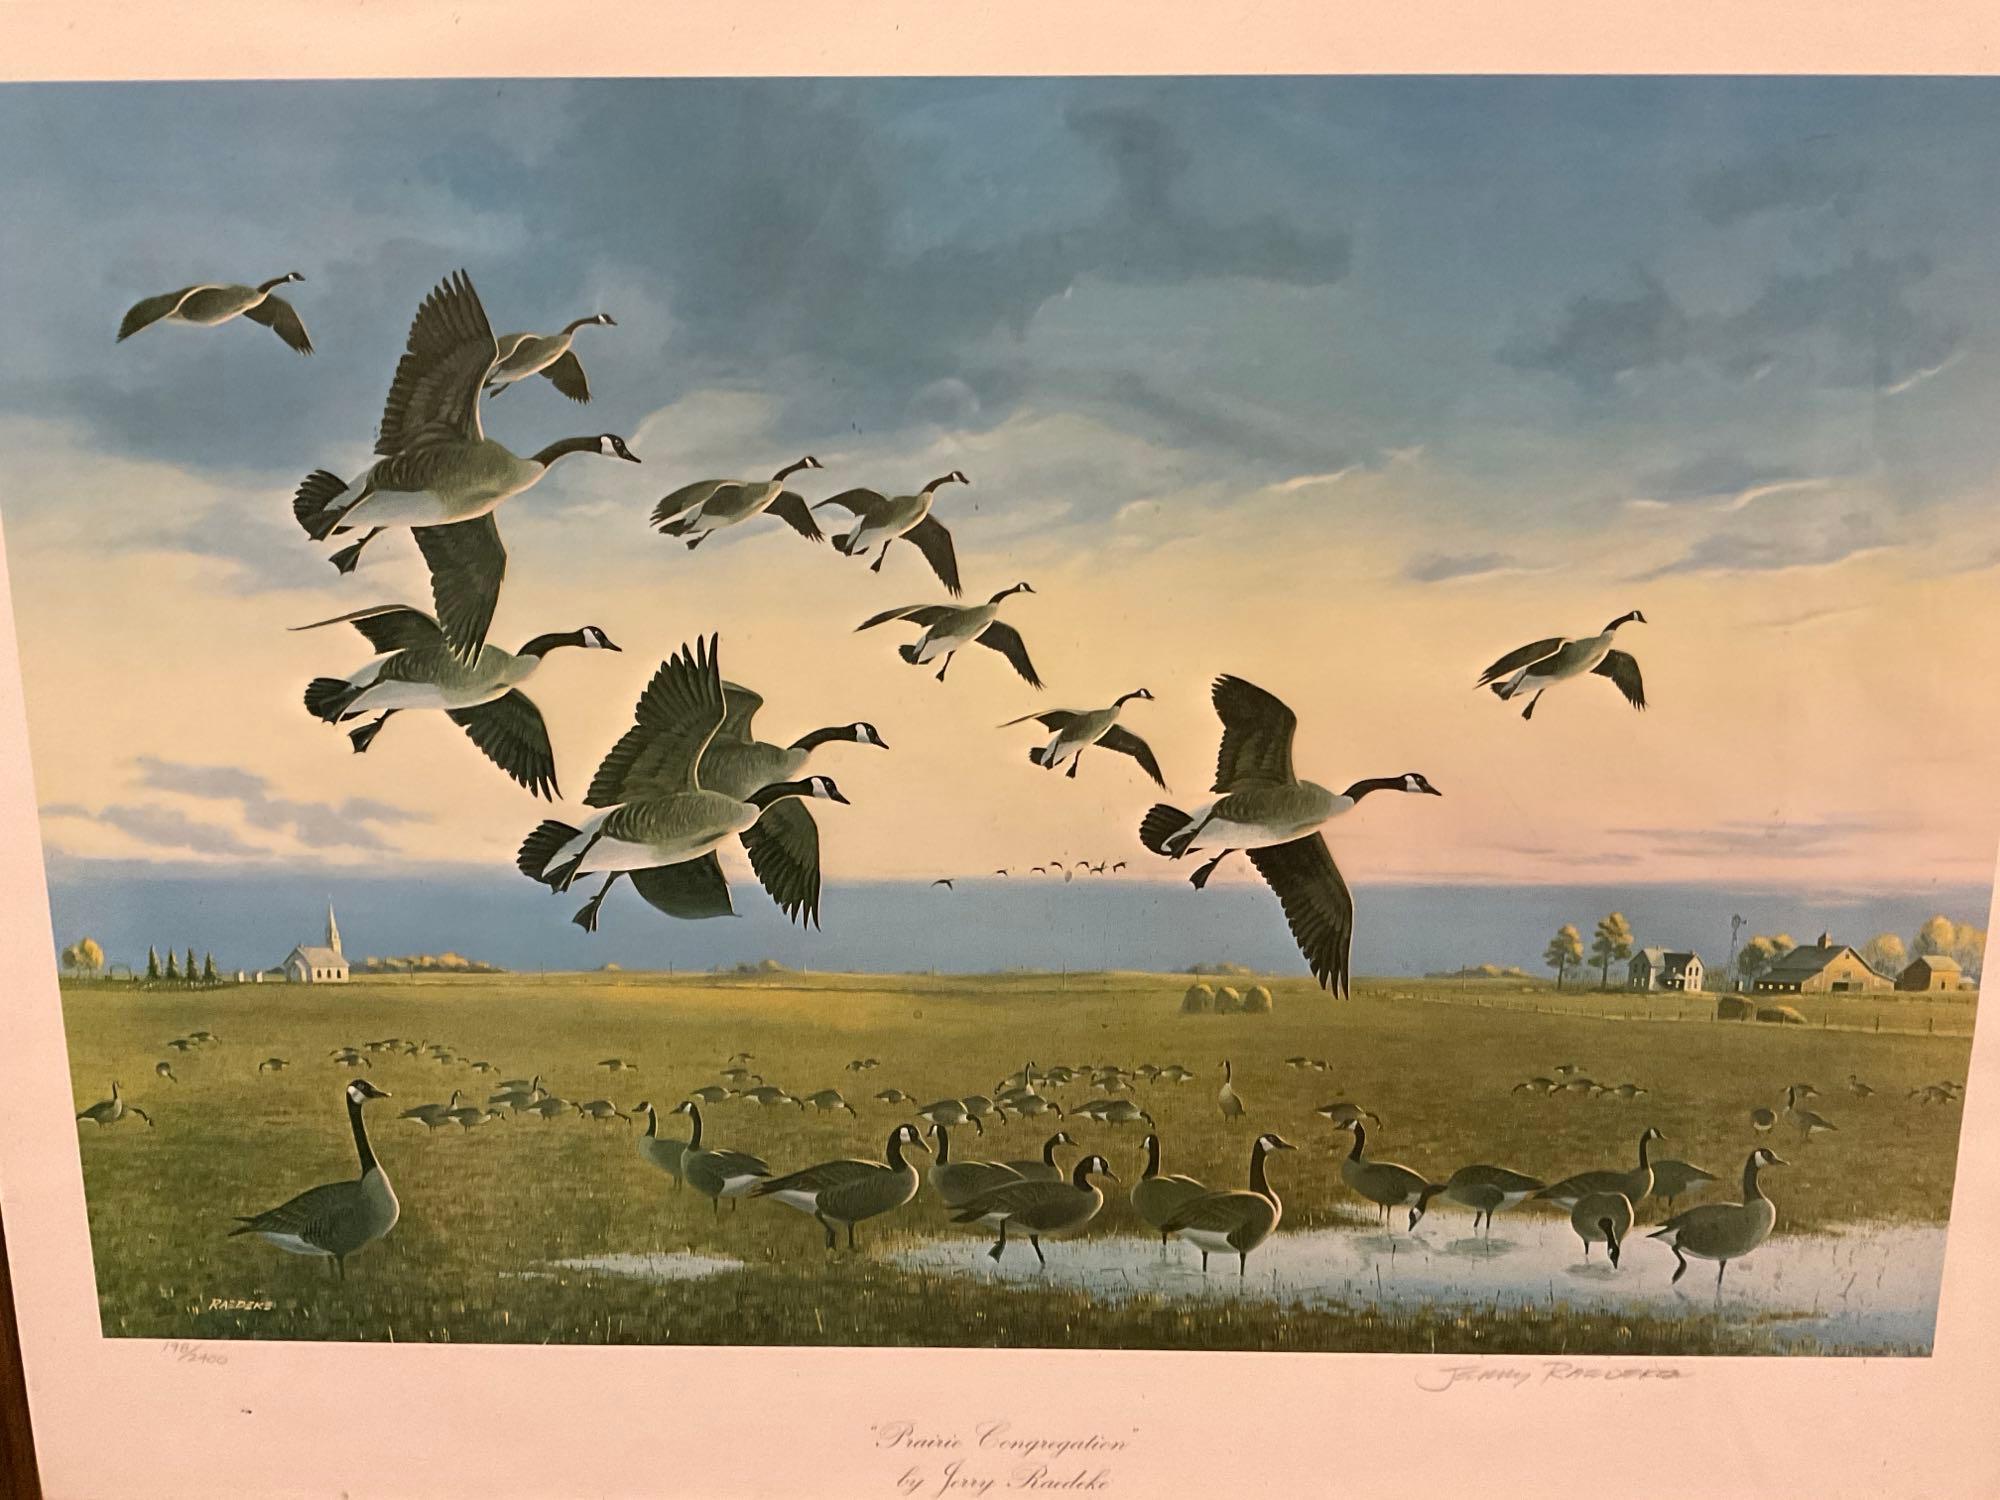 Framed Print of Prairie Congregation by Jerry Raedeke, signed and #d 198/2400 Lithograph